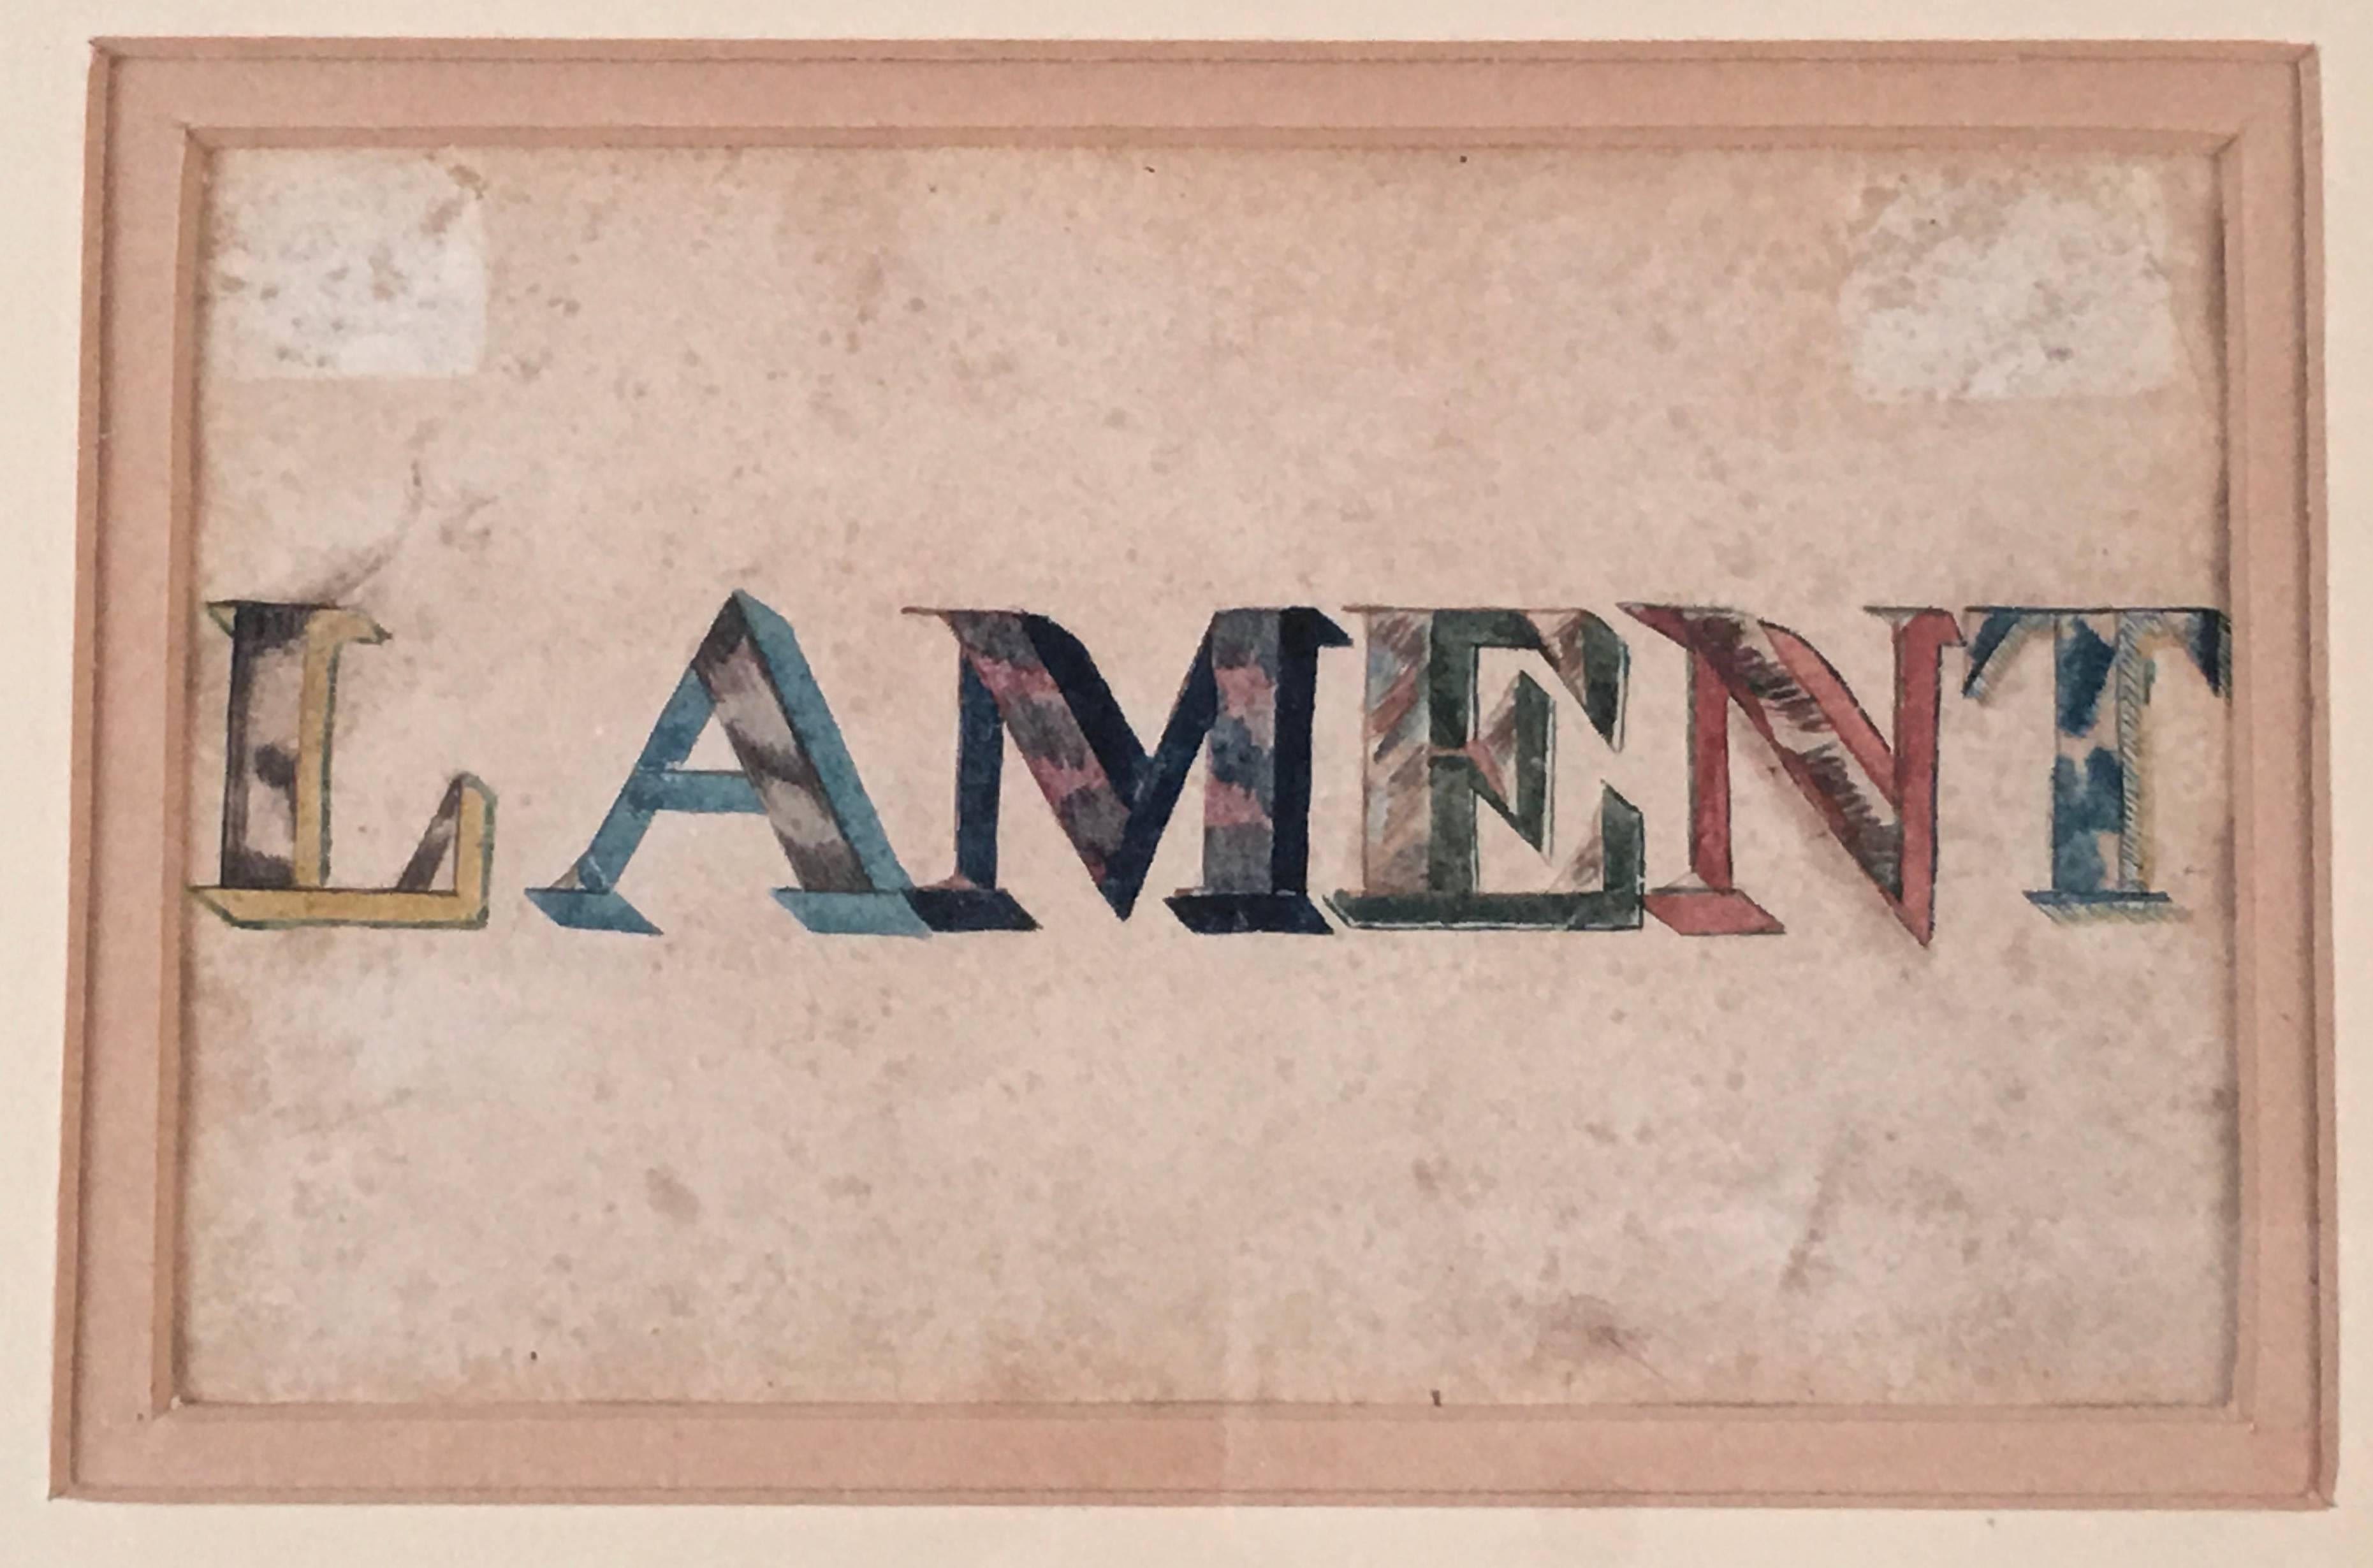 An unusual 19th century watercolor painting or sign with the word LAMENT spelled out in beautifully drawn letters, in oddly, exuberant colors and patterns given the meaning of the word. On paper, double matted in a period gilded frame.